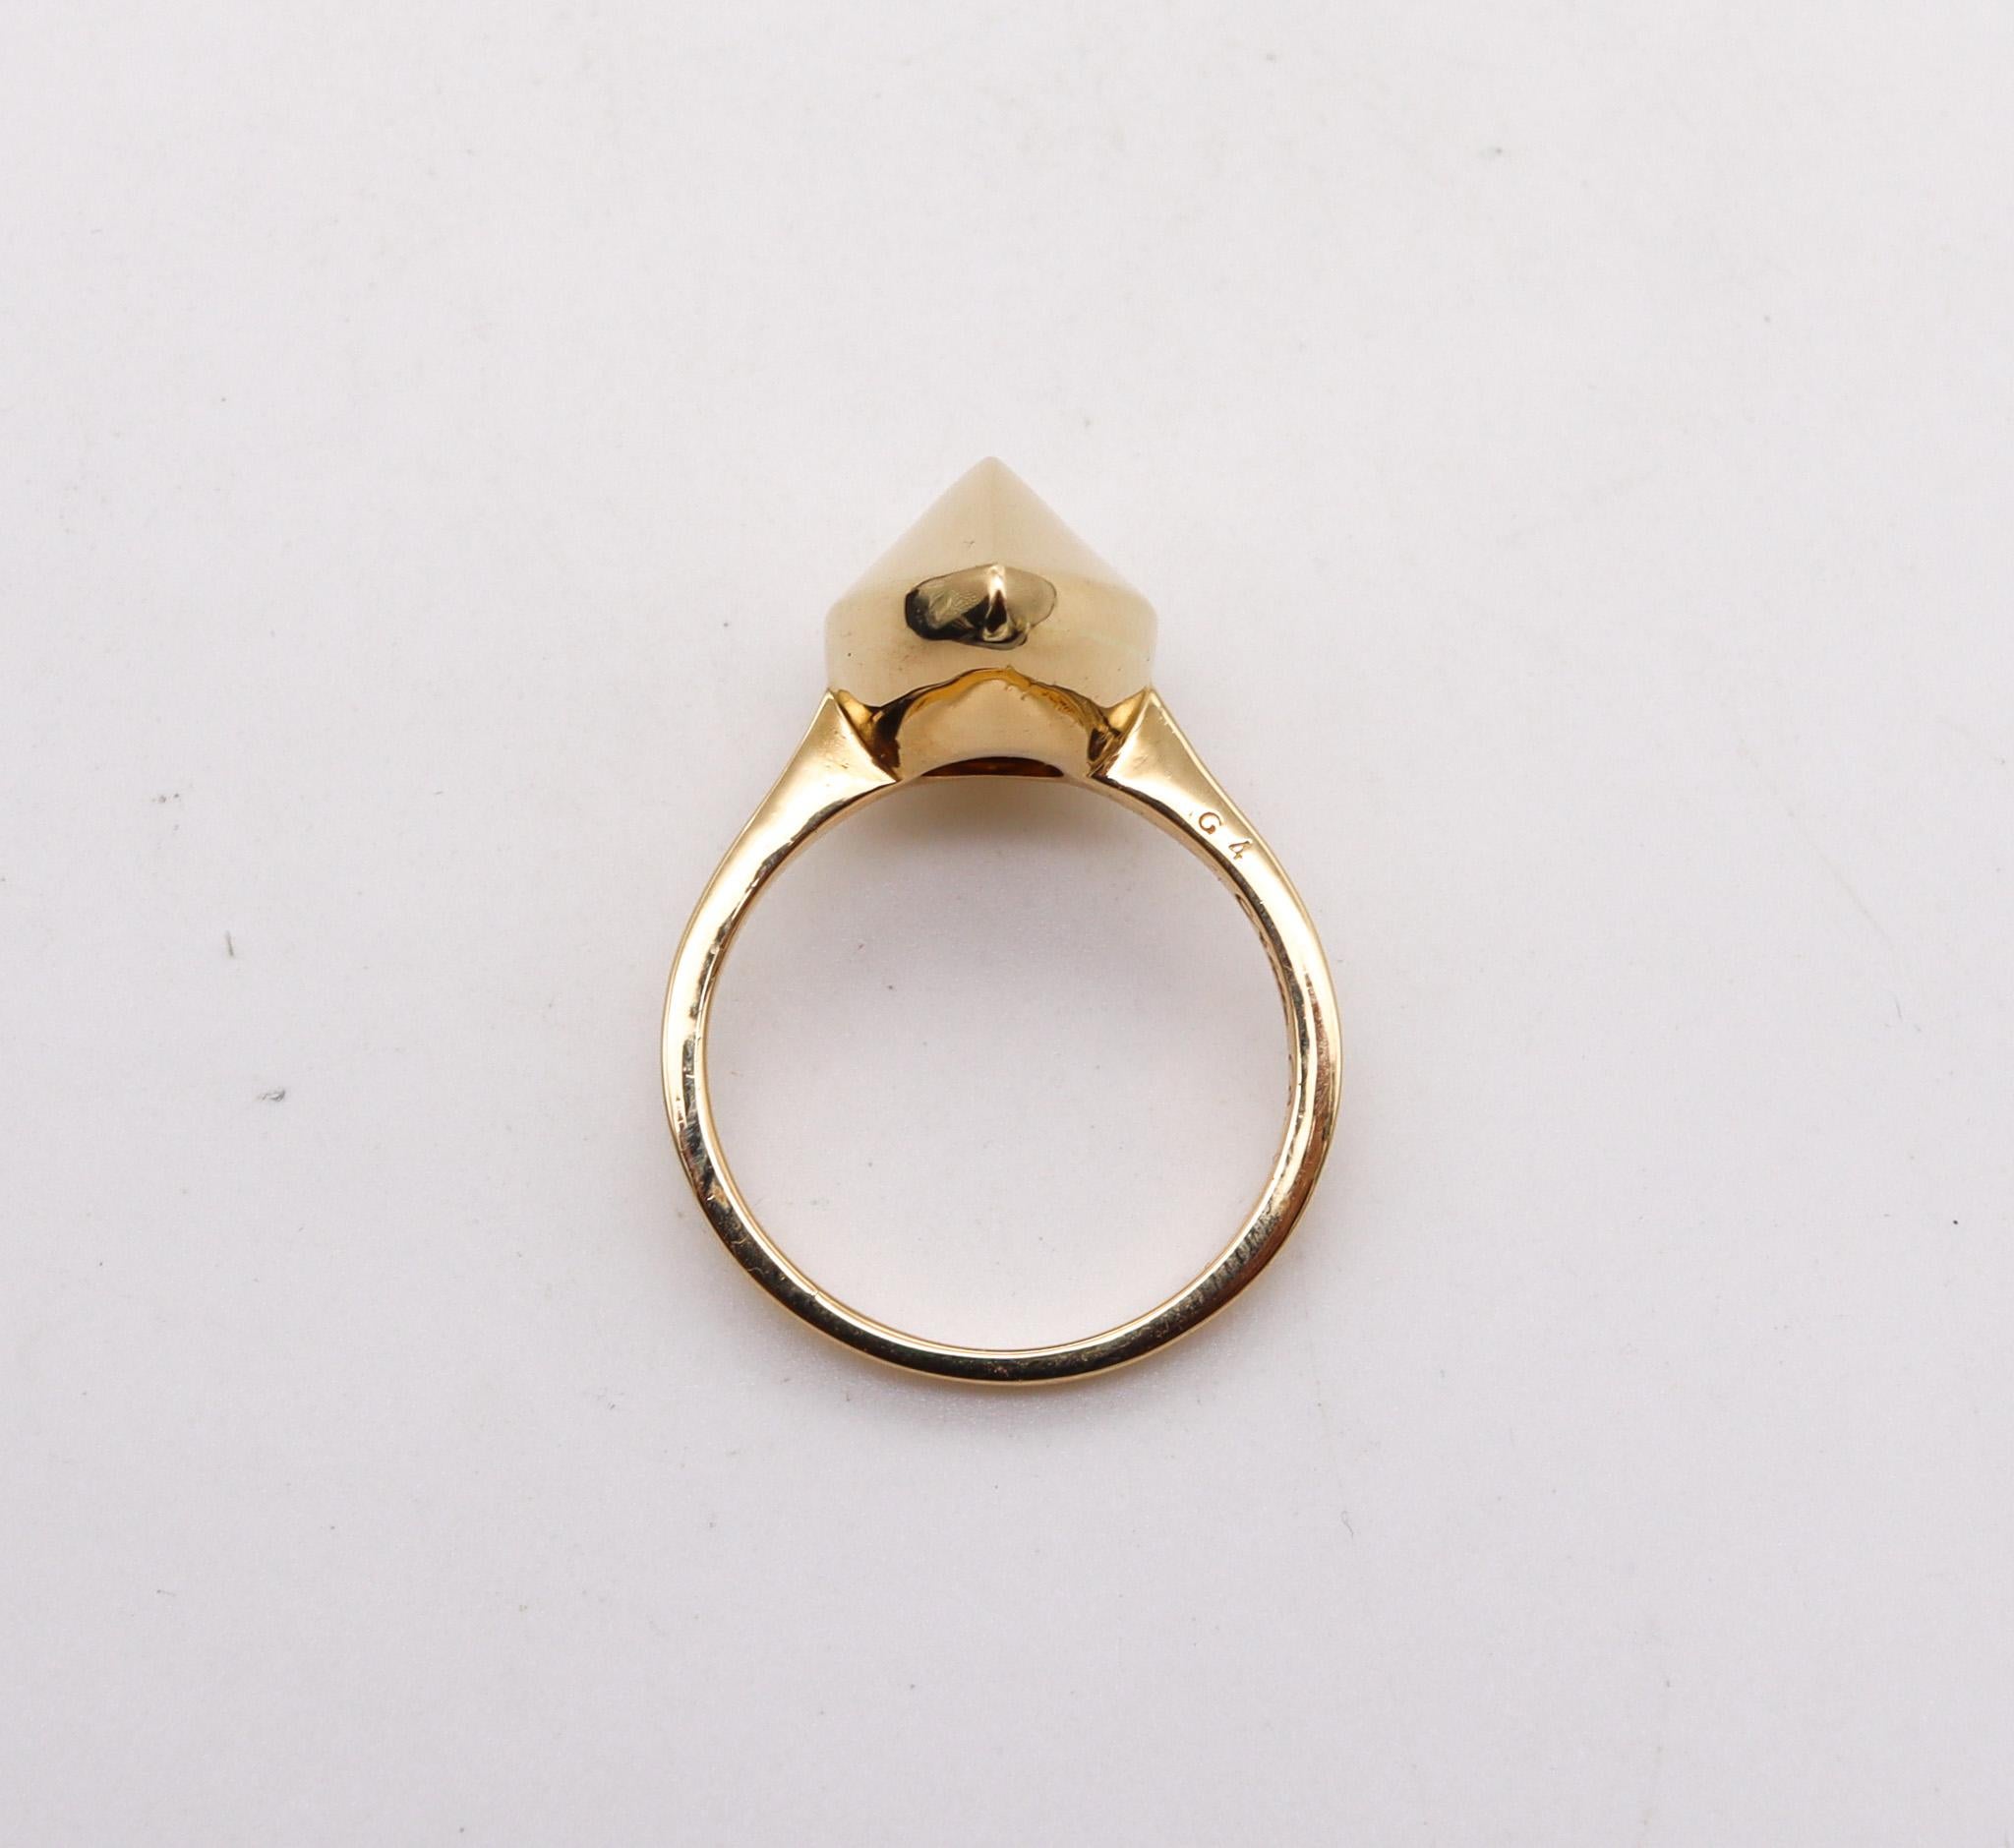 Aletto Brothers Stackable Medium Pear Shaped Geometric Ring in 18kt Yellow Gold In New Condition For Sale In Miami, FL